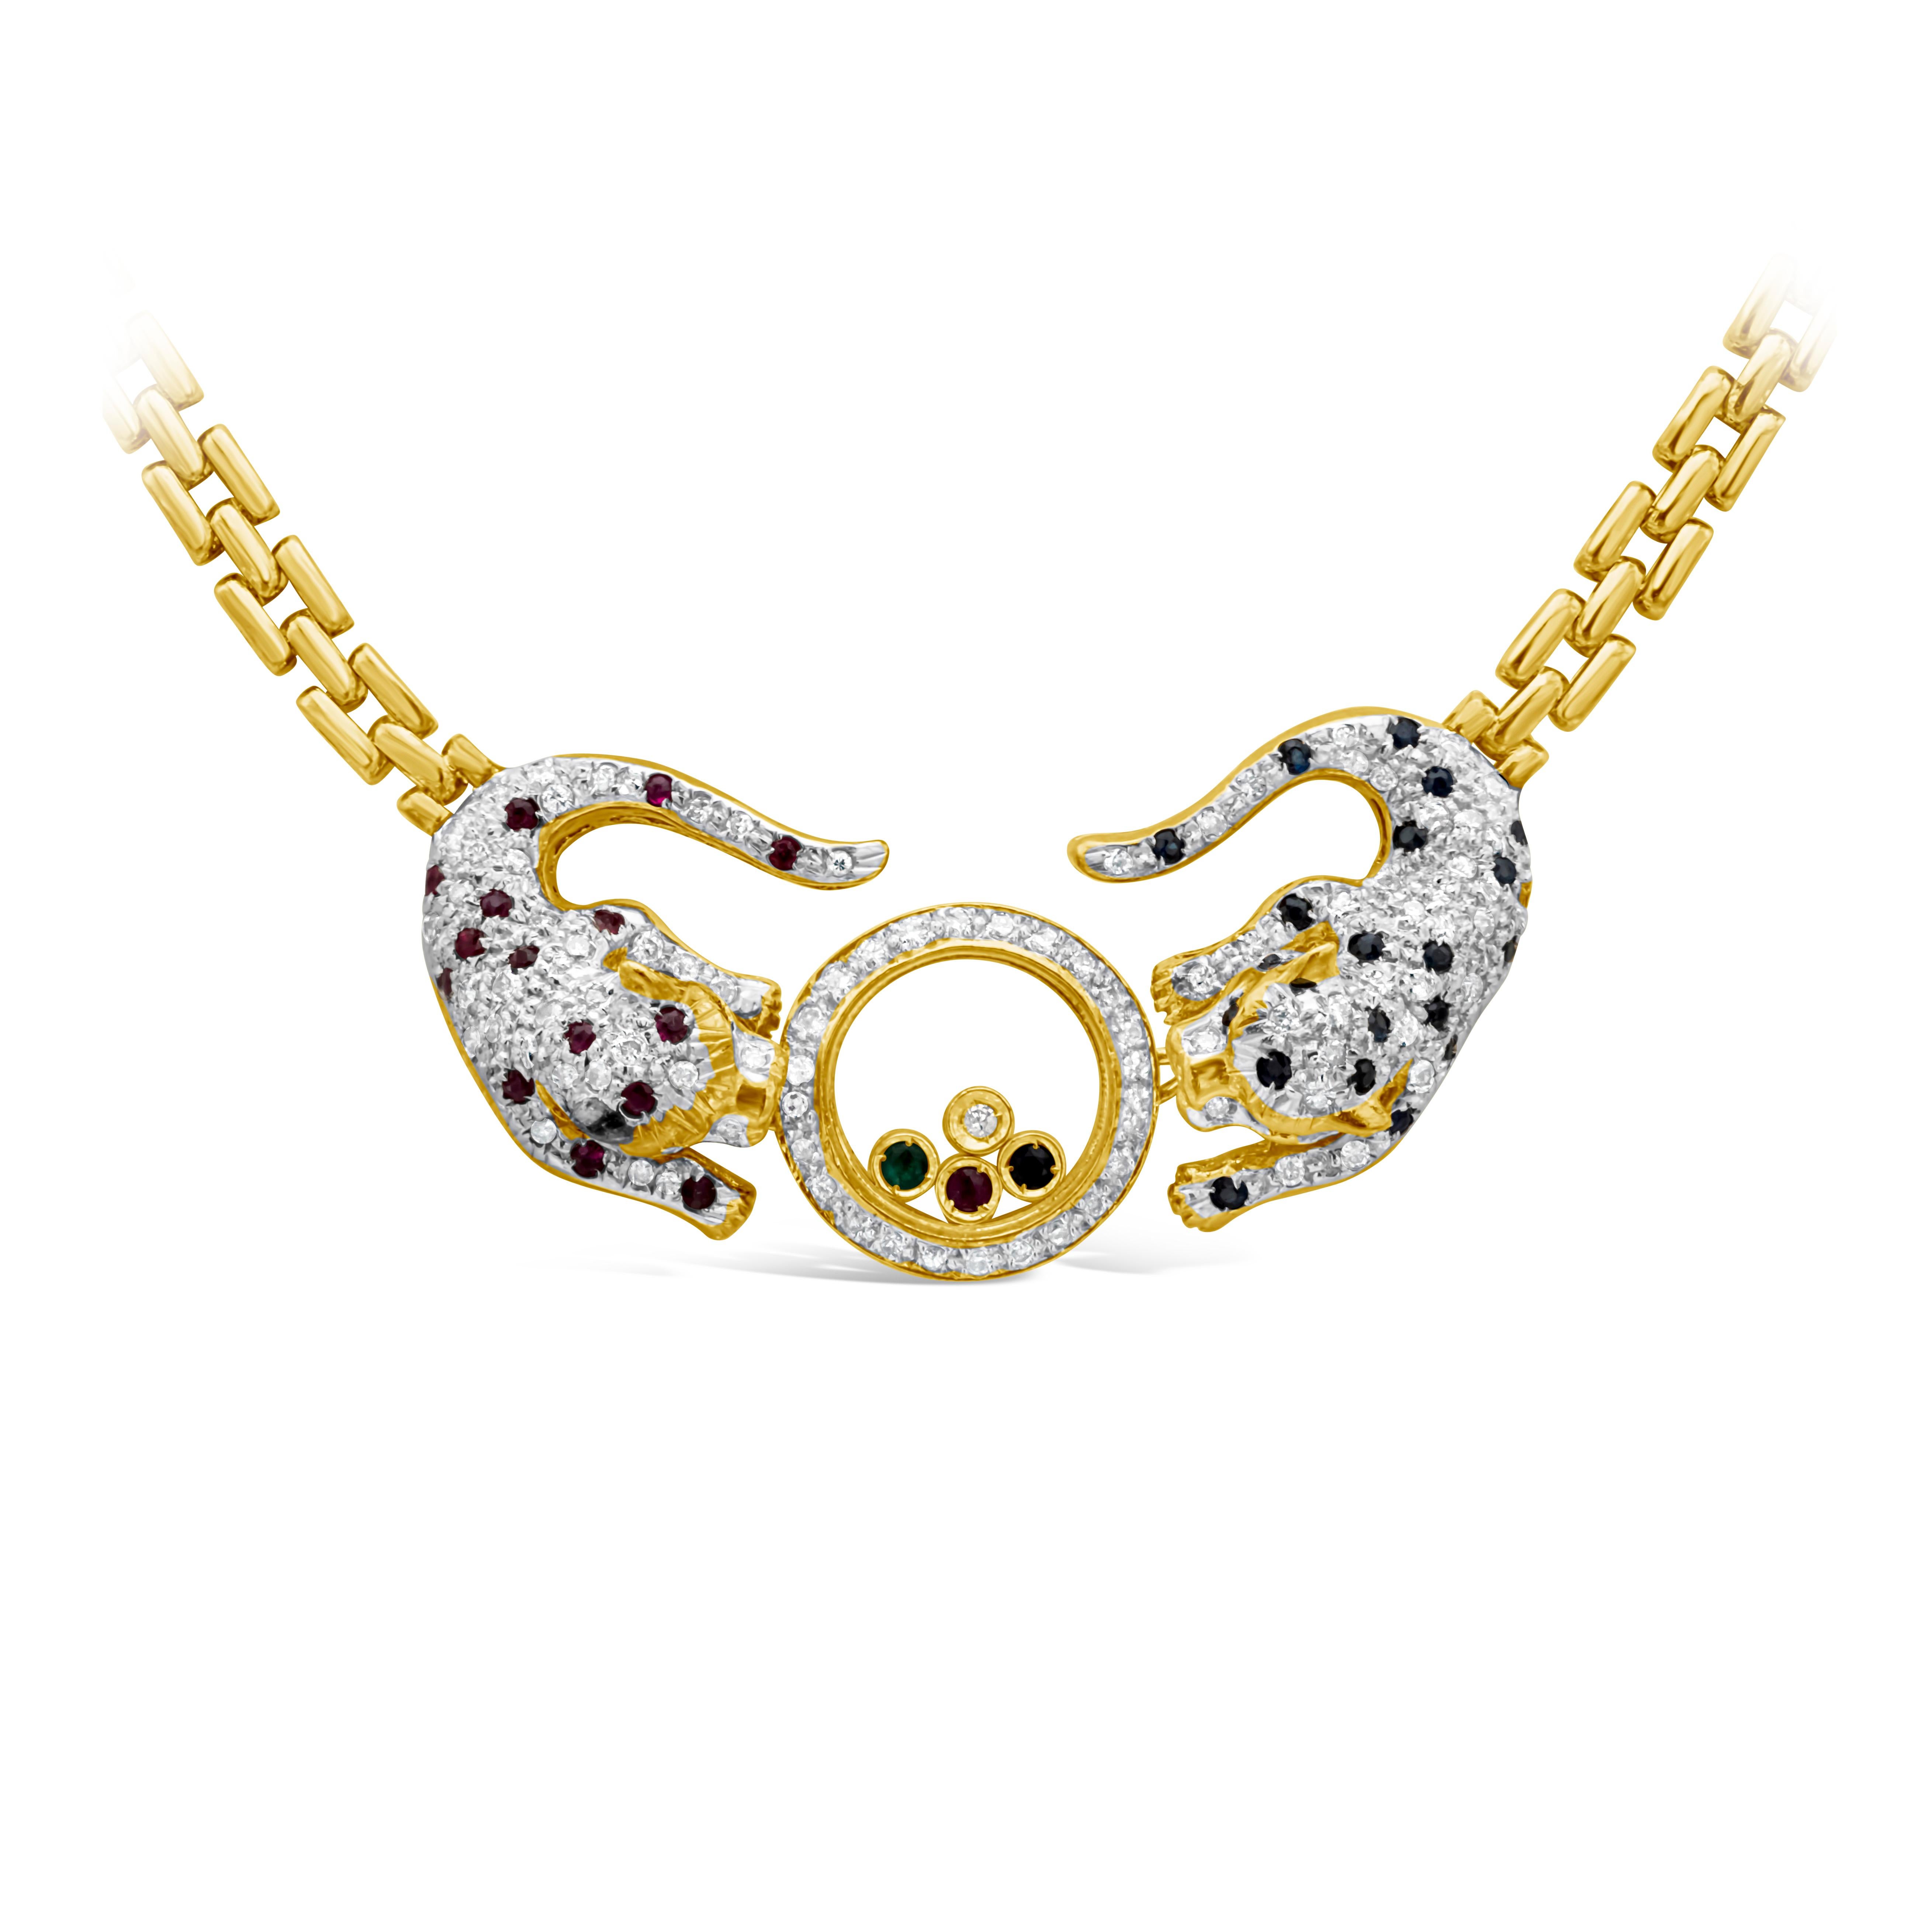 A artistic and luxurious gold link necklace featuring two perfectly matched jaguar encrusted with round brilliant diamonds, ruby and sapphires, with glass encased in the middle featuring mixed gemstones, bezel set, surrounded by a row of round